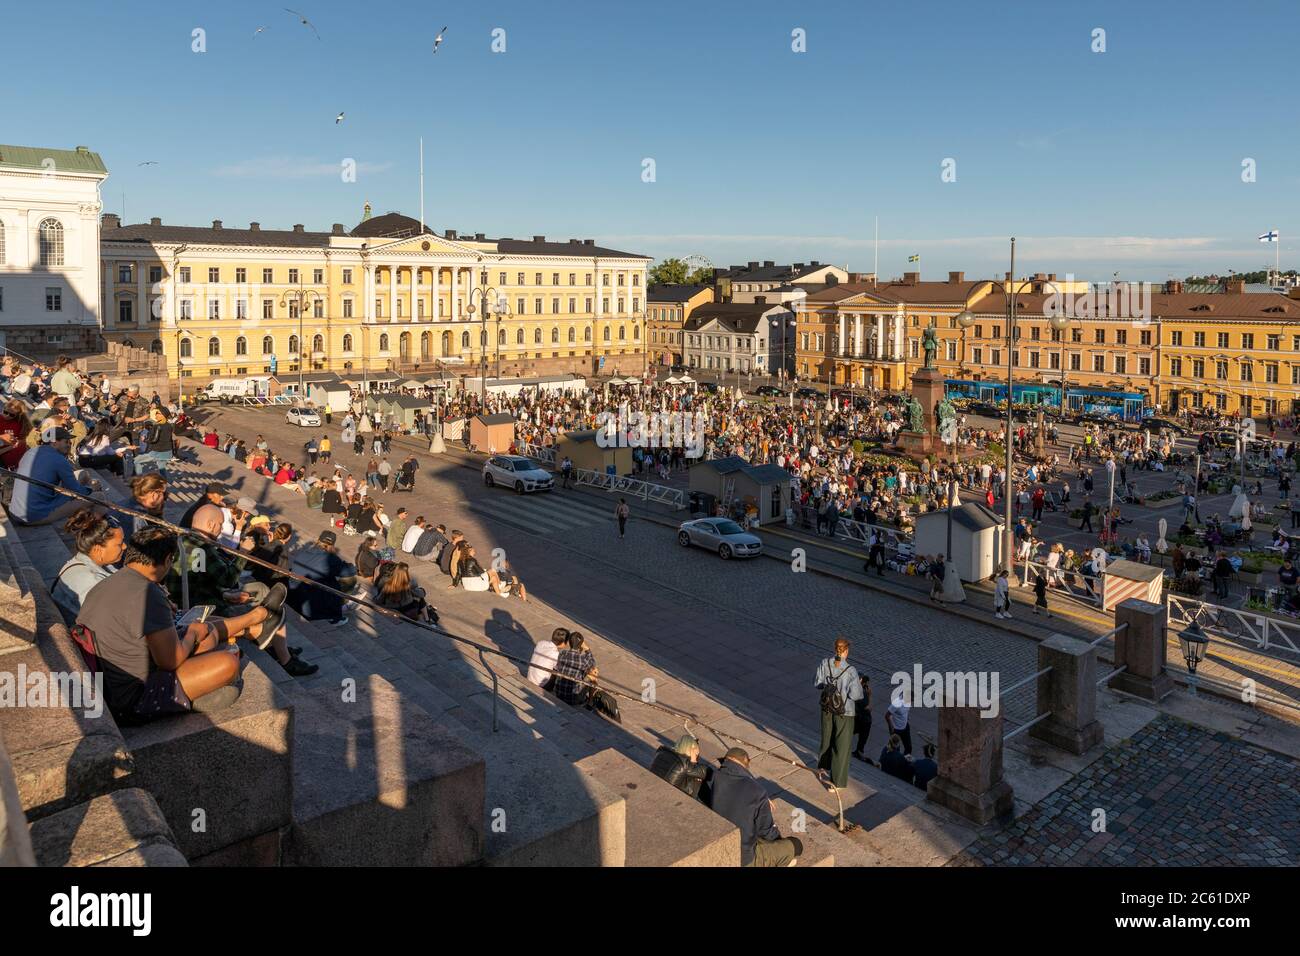 Senate square, downtown Helsinki, is transformed into a giant restaurant area. 16 restaurants are providing their specialities to customers. Stock Photo